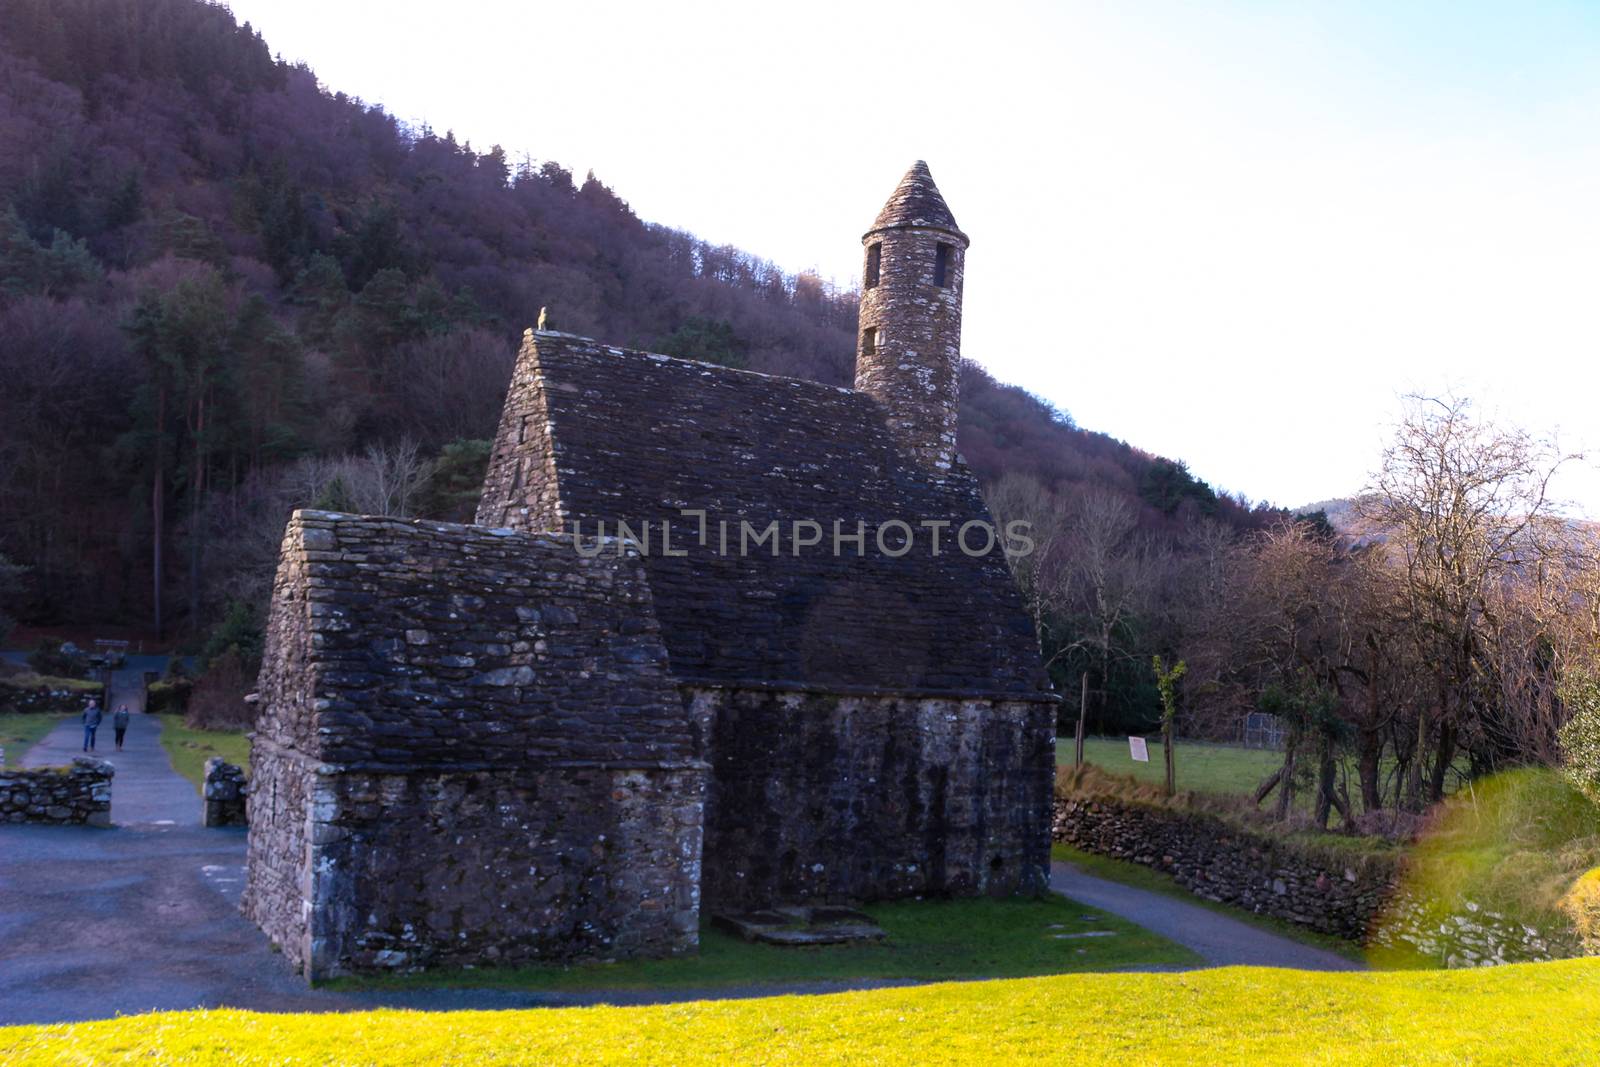 GLENDALOUGH, IRELAND - February 20 2018: The ancient cemetery in monastic site Glendalough. Glendalough Valley, Wicklow Mountains National Park, Ireland. Glendalough is home to one of the most important monastic sites in Ireland. This early Christian monastic settlement was founded by St. Kevin in the 6th century and from this developed the 'Monastic City'.